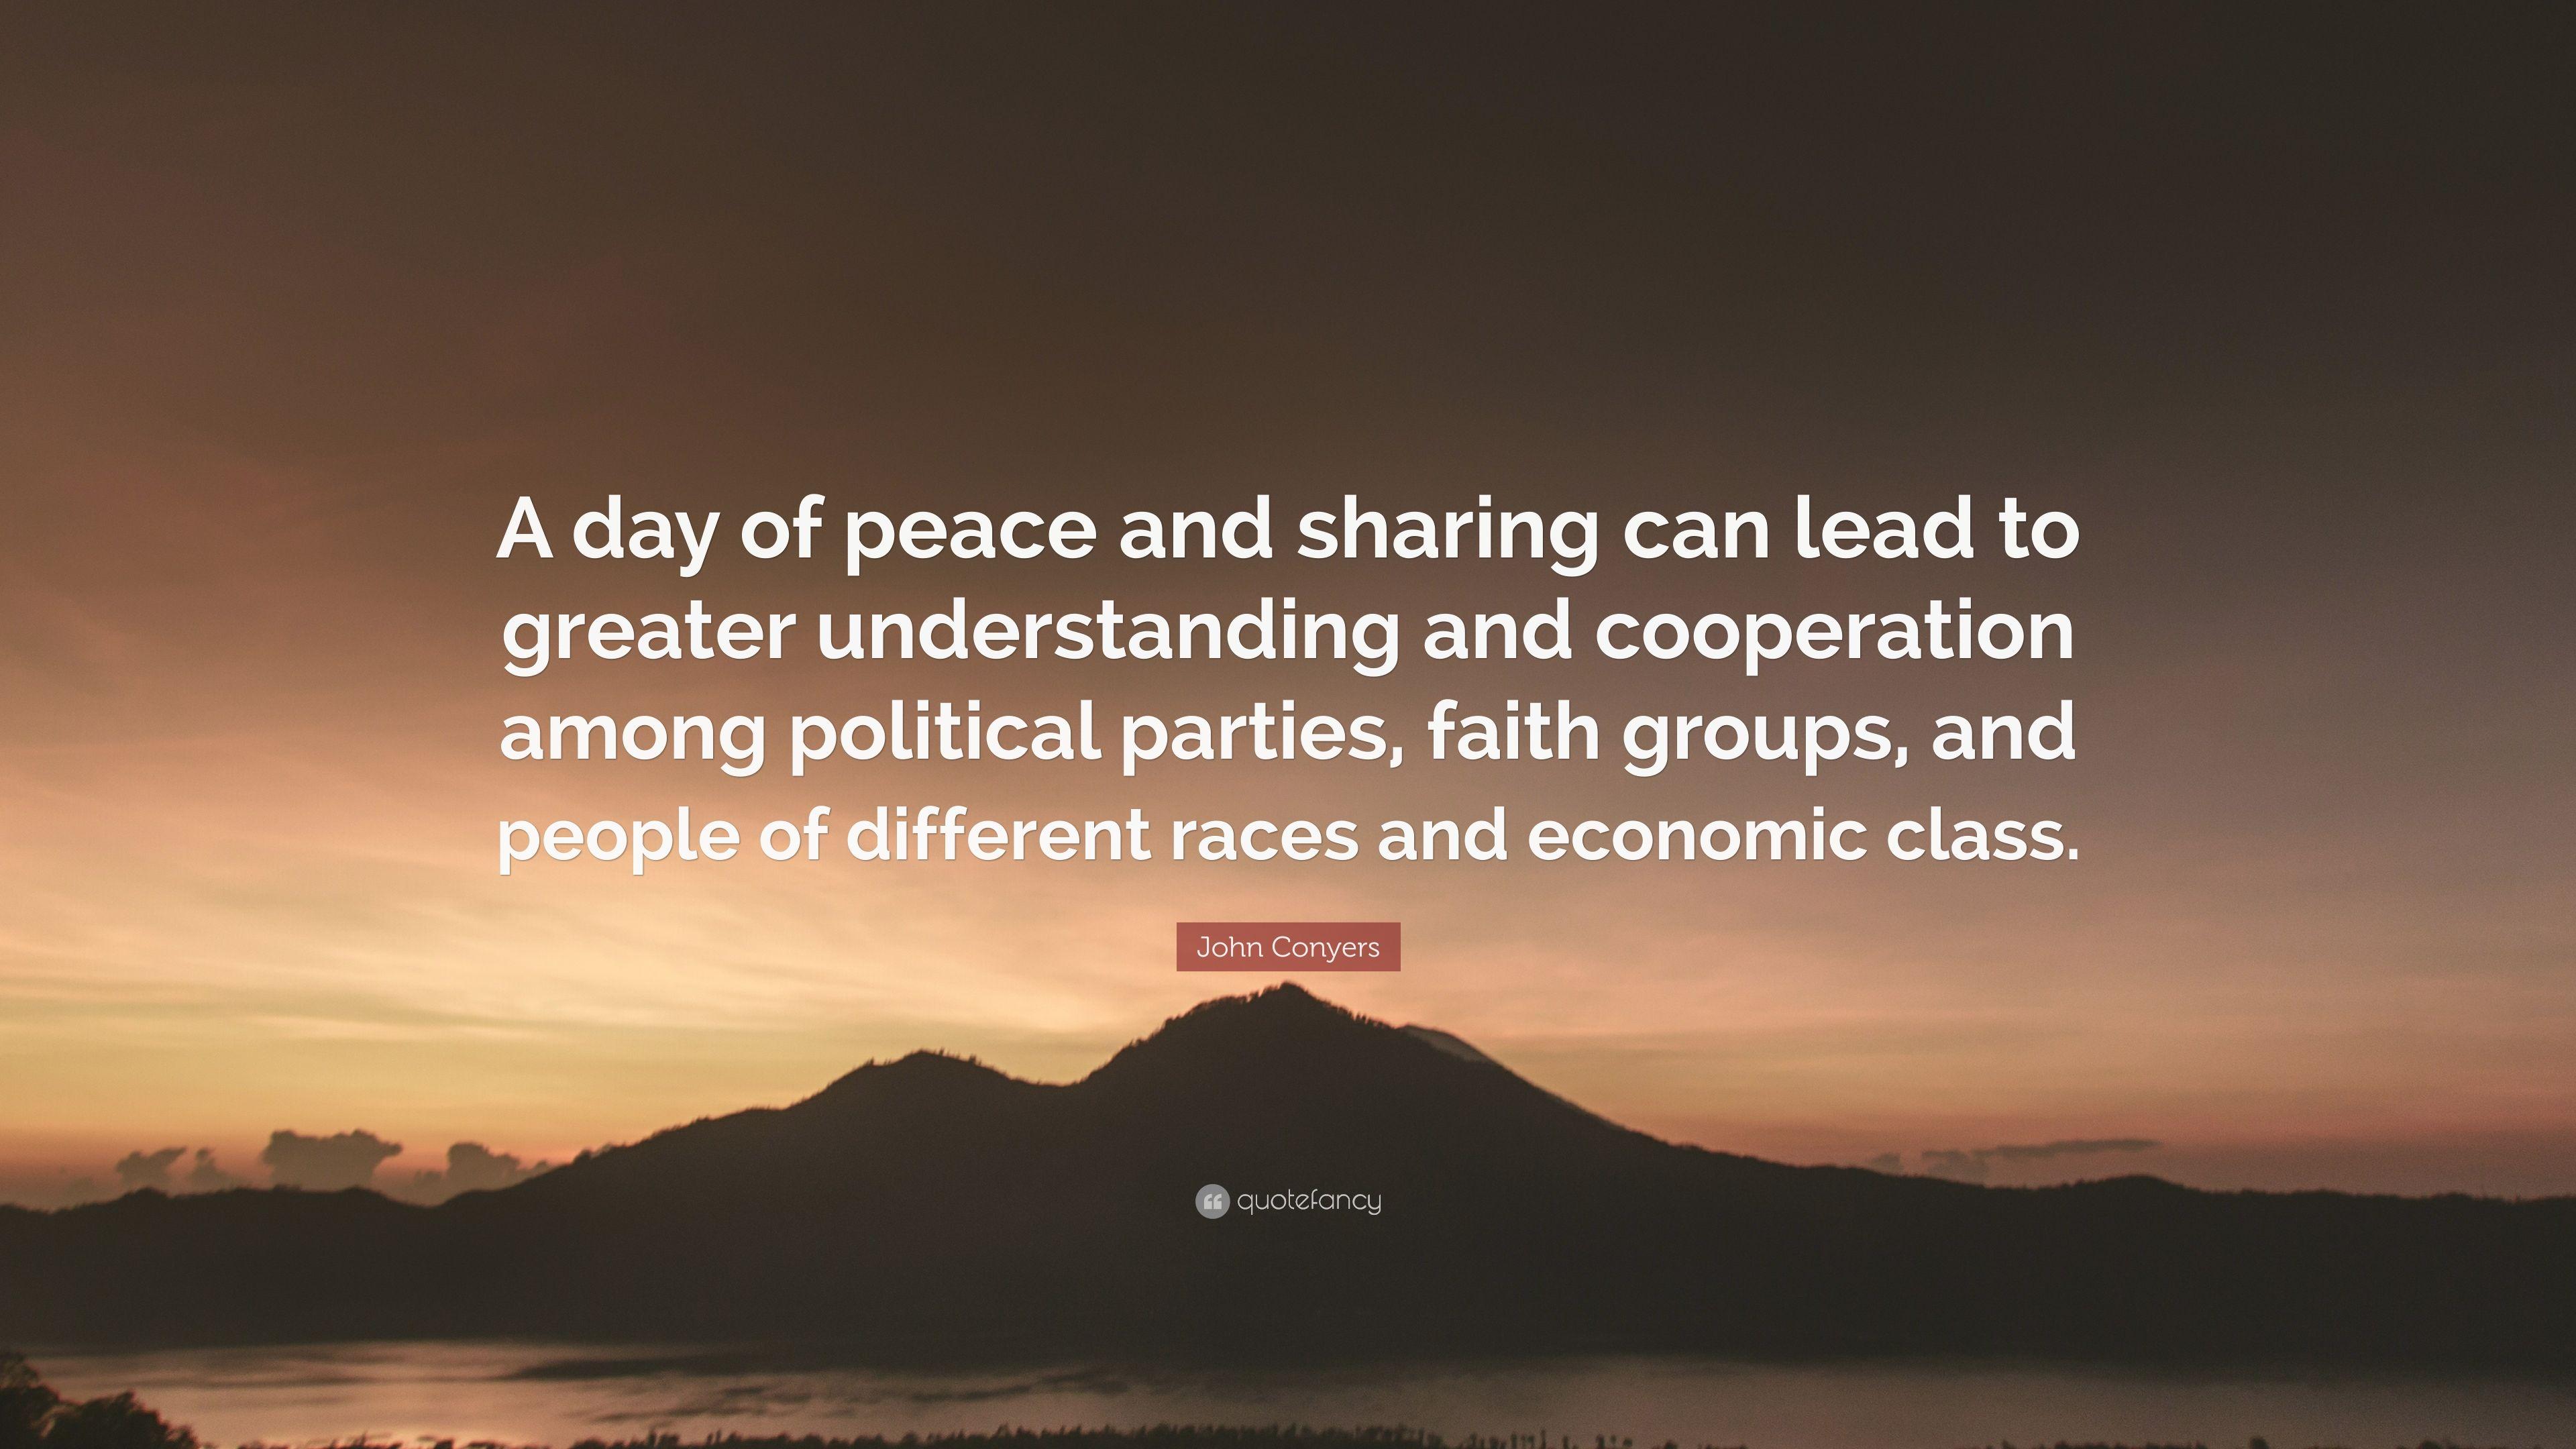 John Conyers Quote: “A day of peace and sharing can lead to